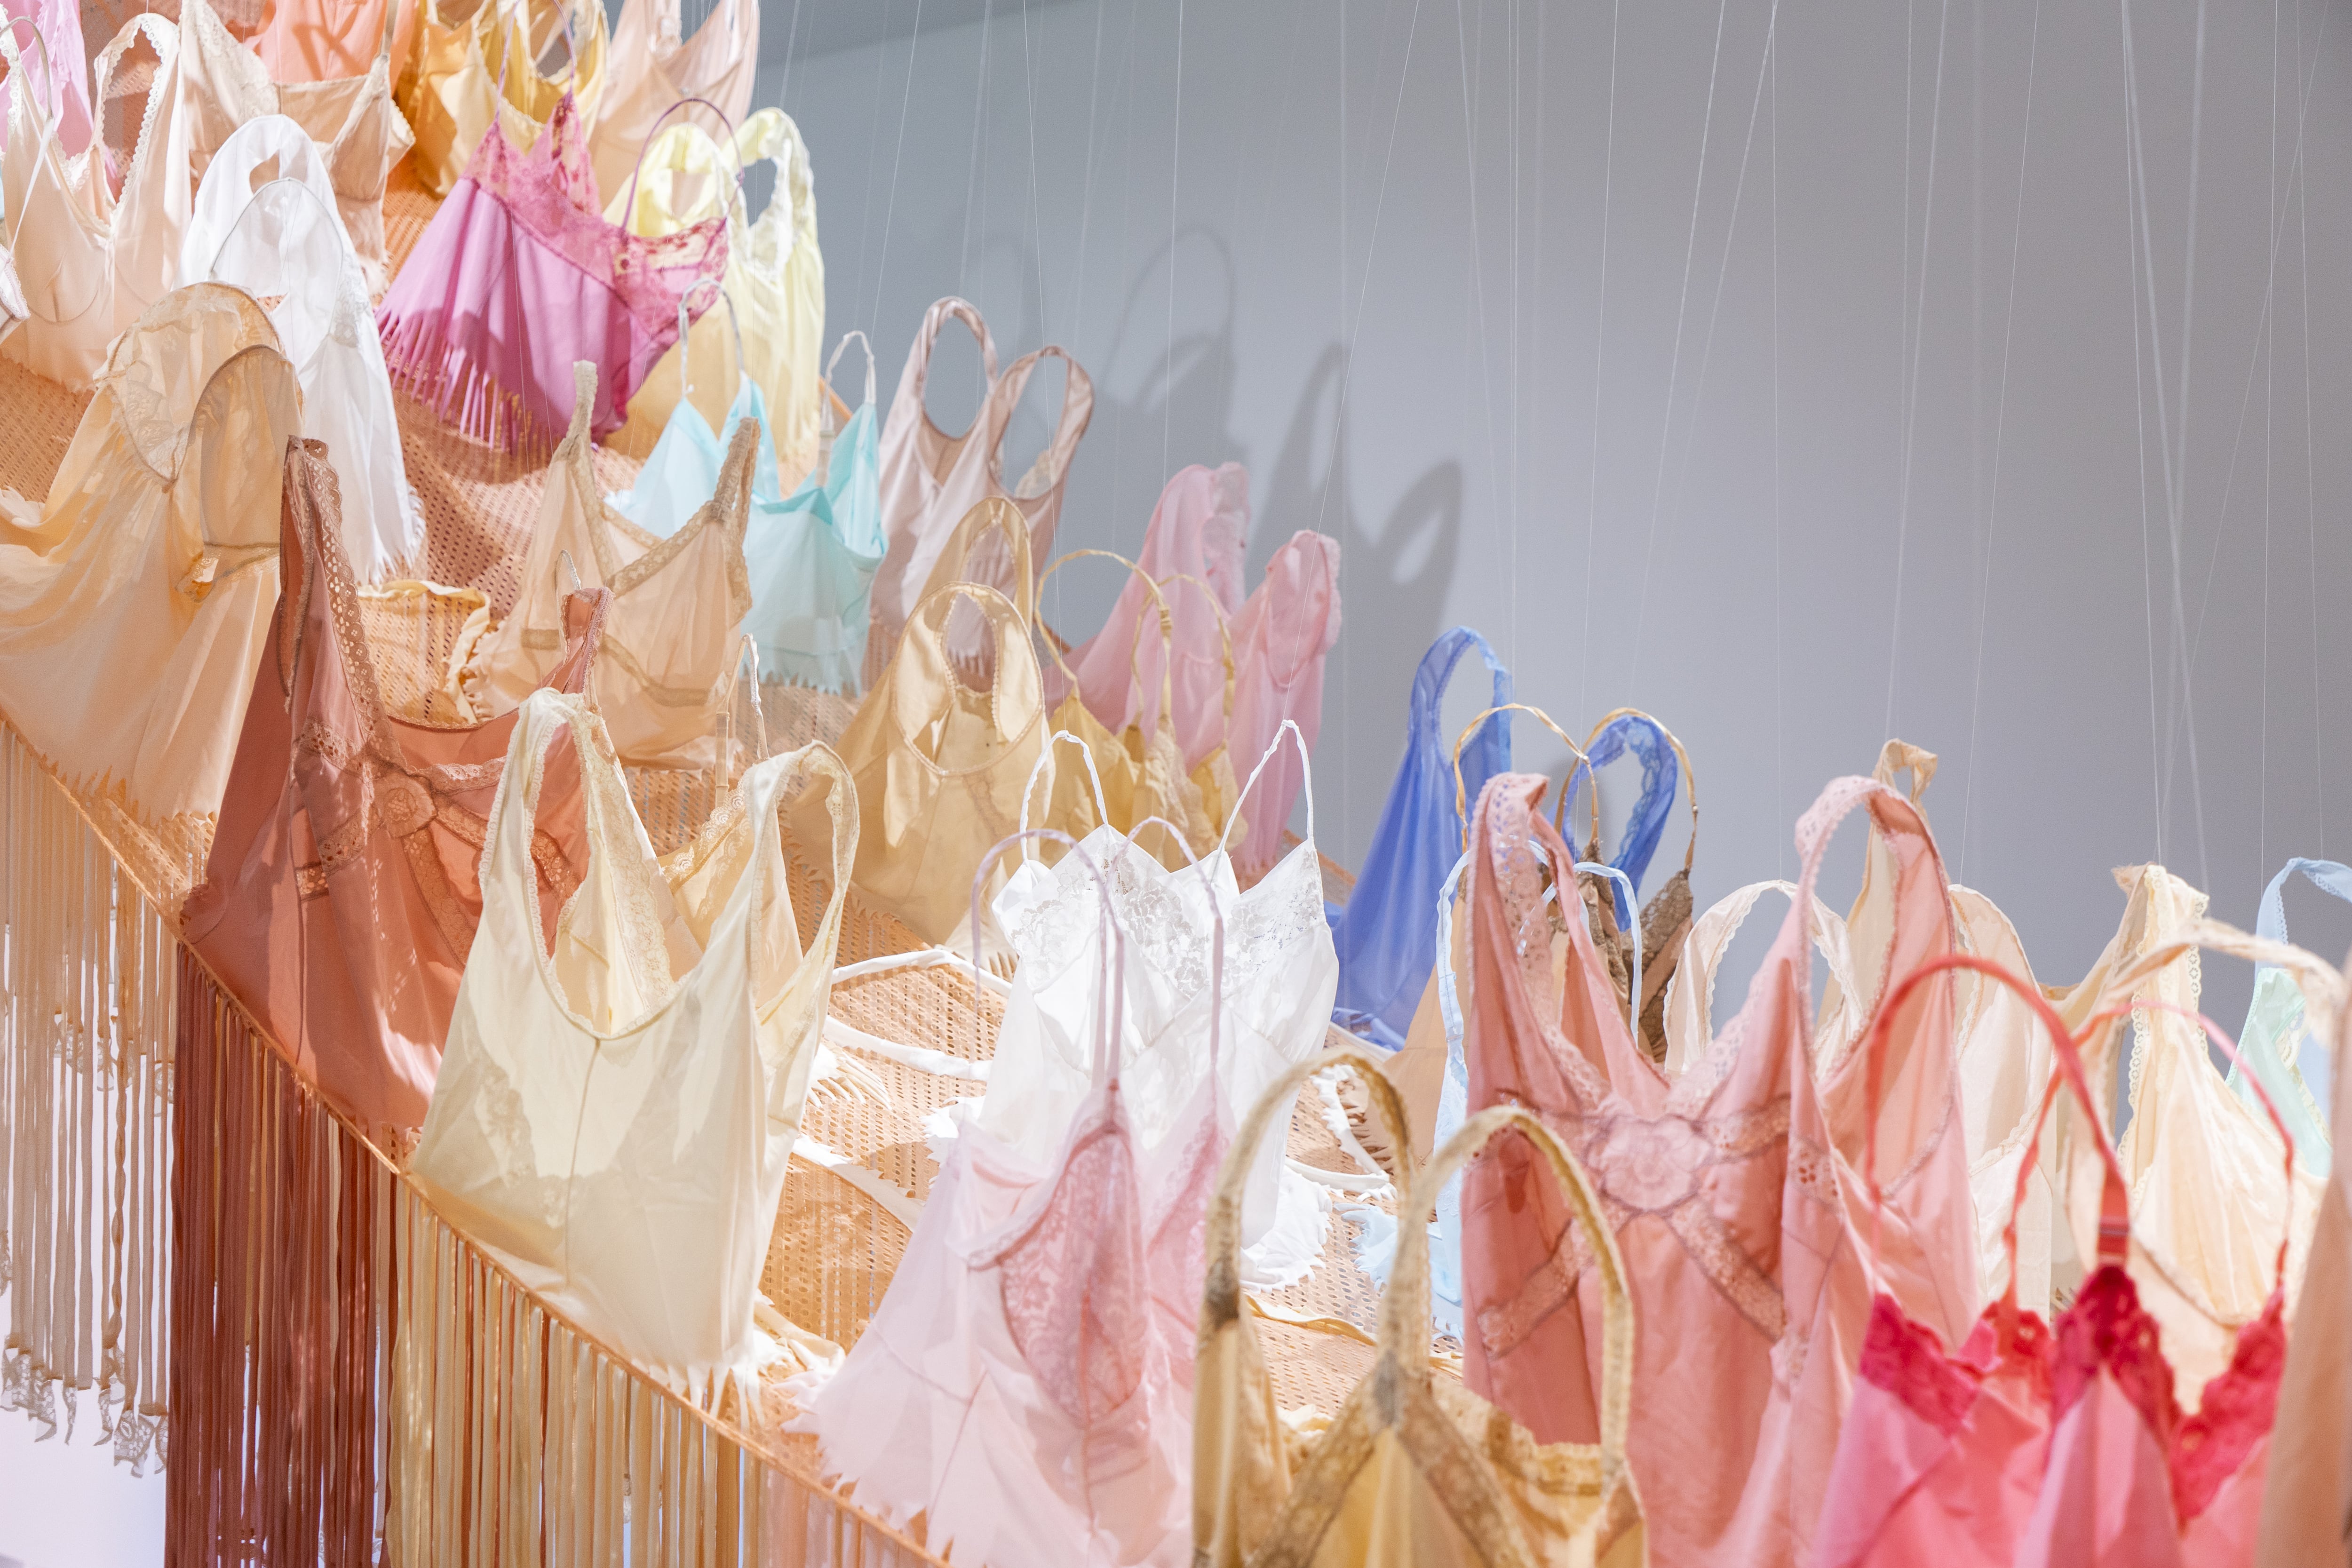 Image 02: Hannah Gartside, 'The Sleepover' (detail) 2018, found nighties and slips, found synthetic fabric and cotton ribbon, millinery wire, thread, wood 540.0 x 280.0 x 210.0 cm. Image courtesy of Ararat Gallery TAMA, Ararat Rural City Council, the artist and Louis Lim.